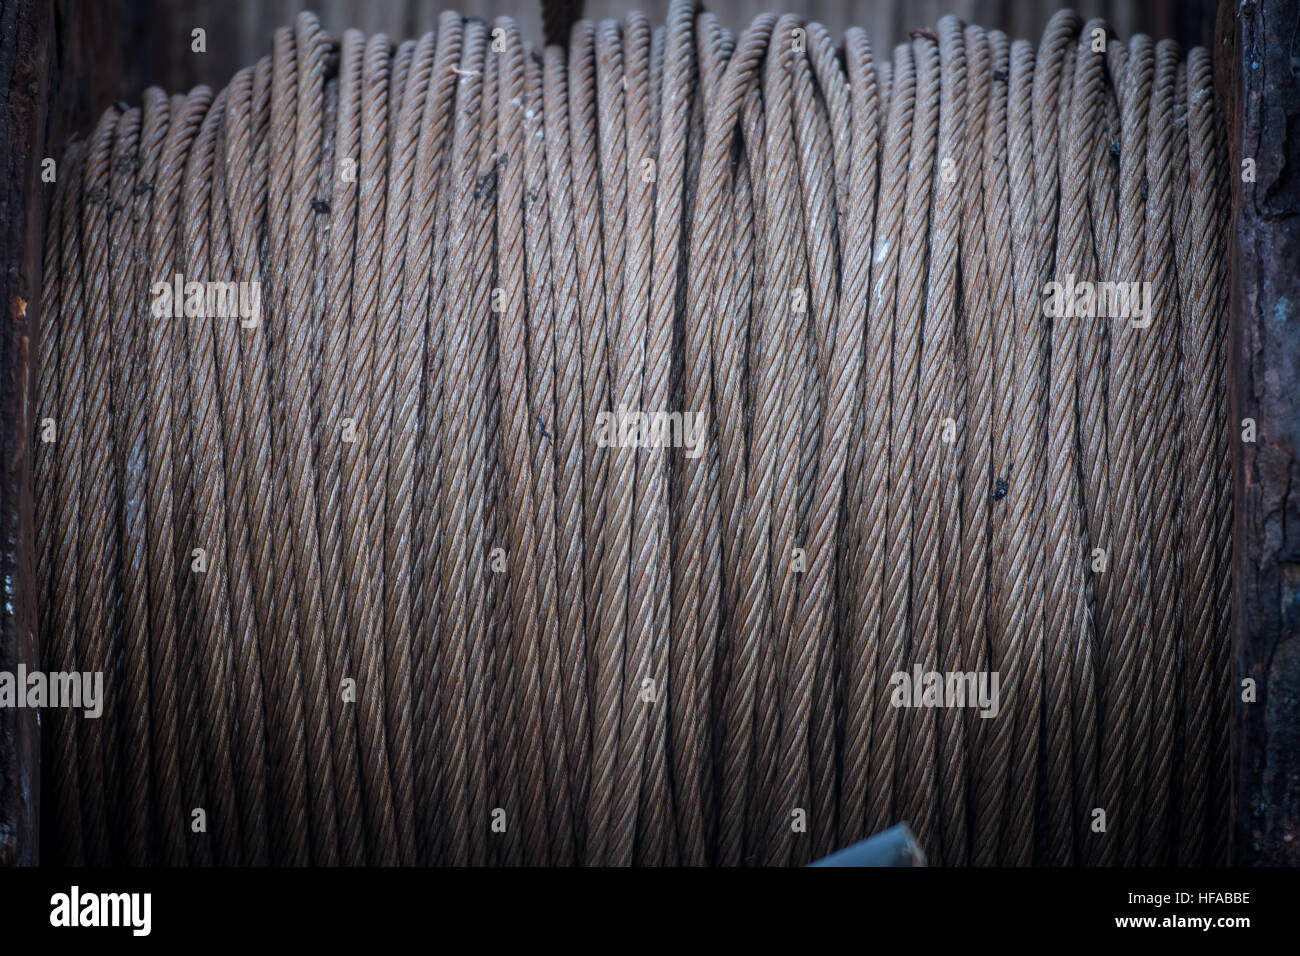 Spool of Thick Cable across entire image Stock Photo